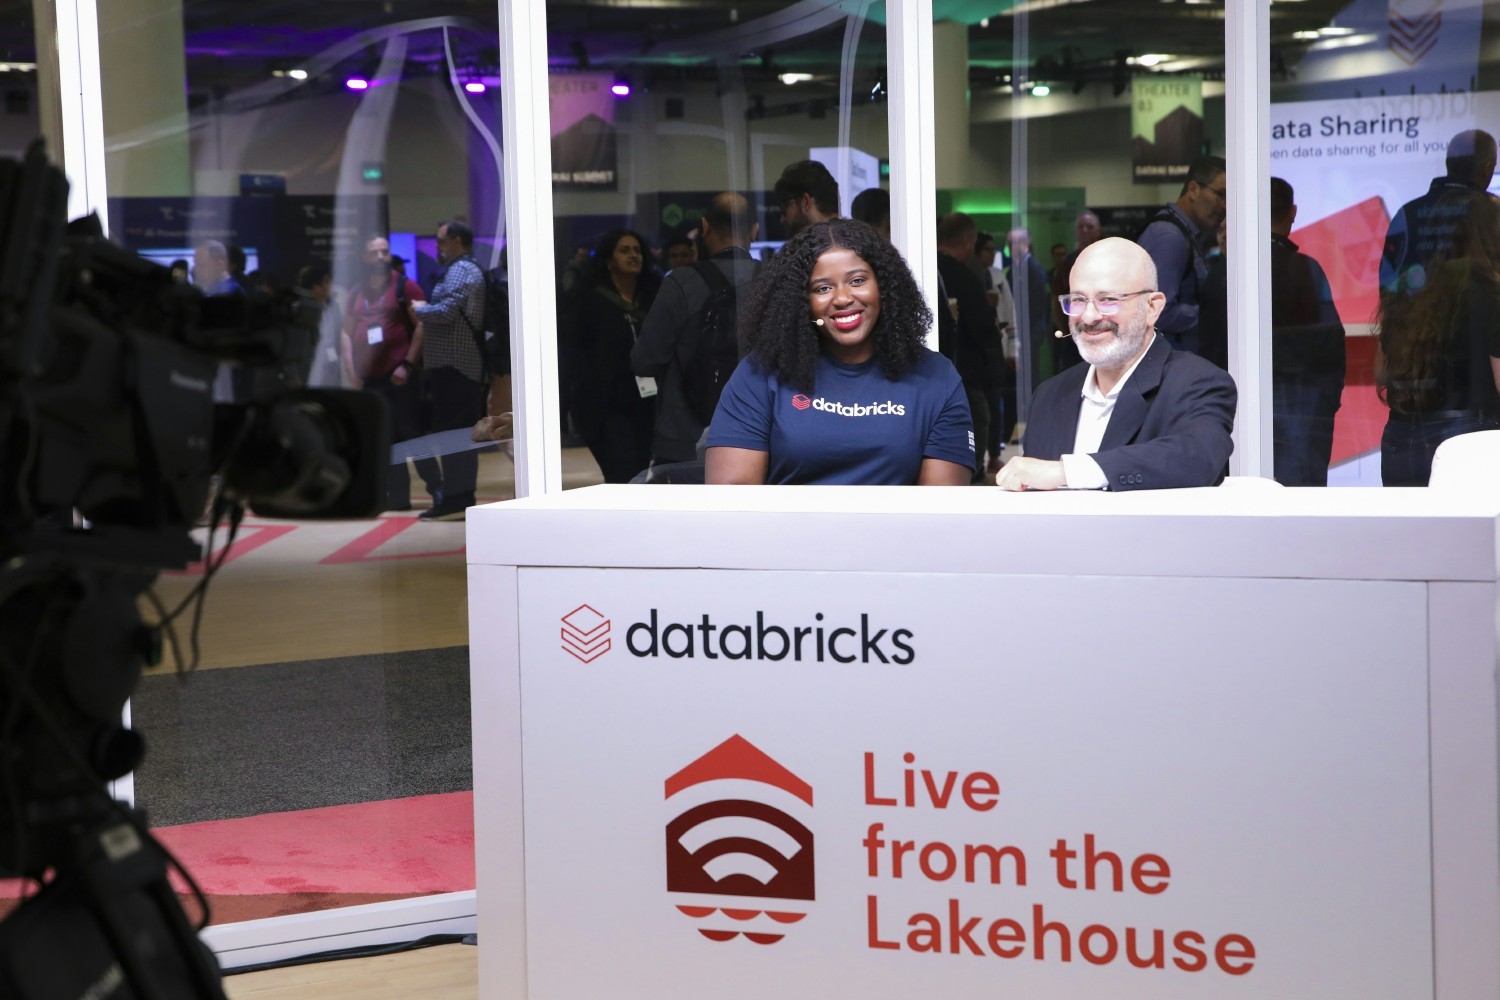 Live from the Lakehouse Datbricks broadcast 